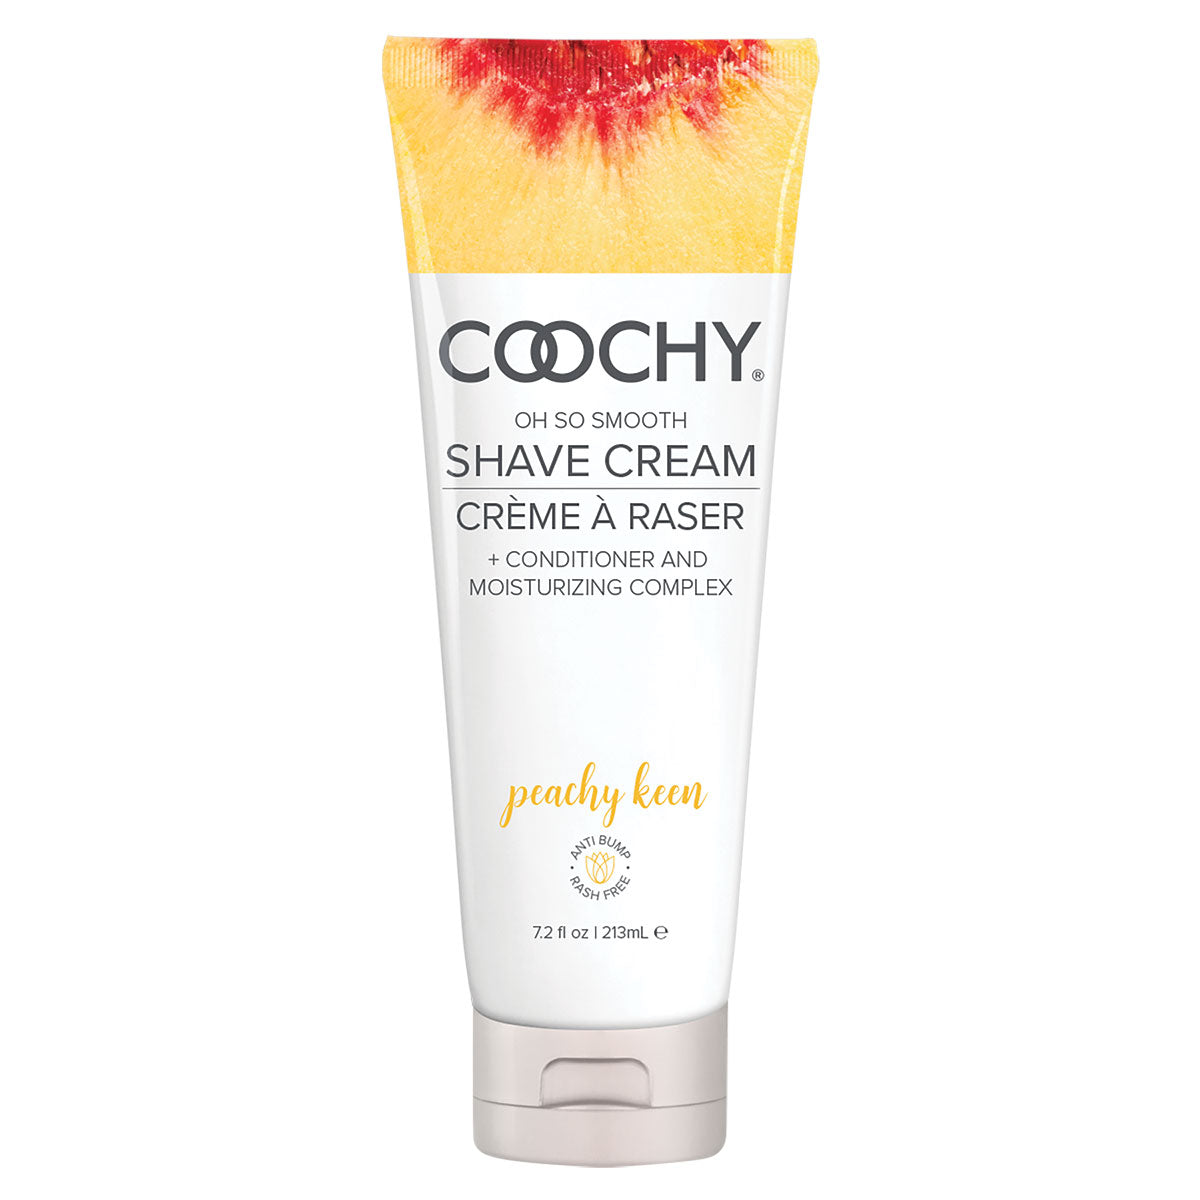 Coochy Shave Cream - 7.2oz - Assorted Scents